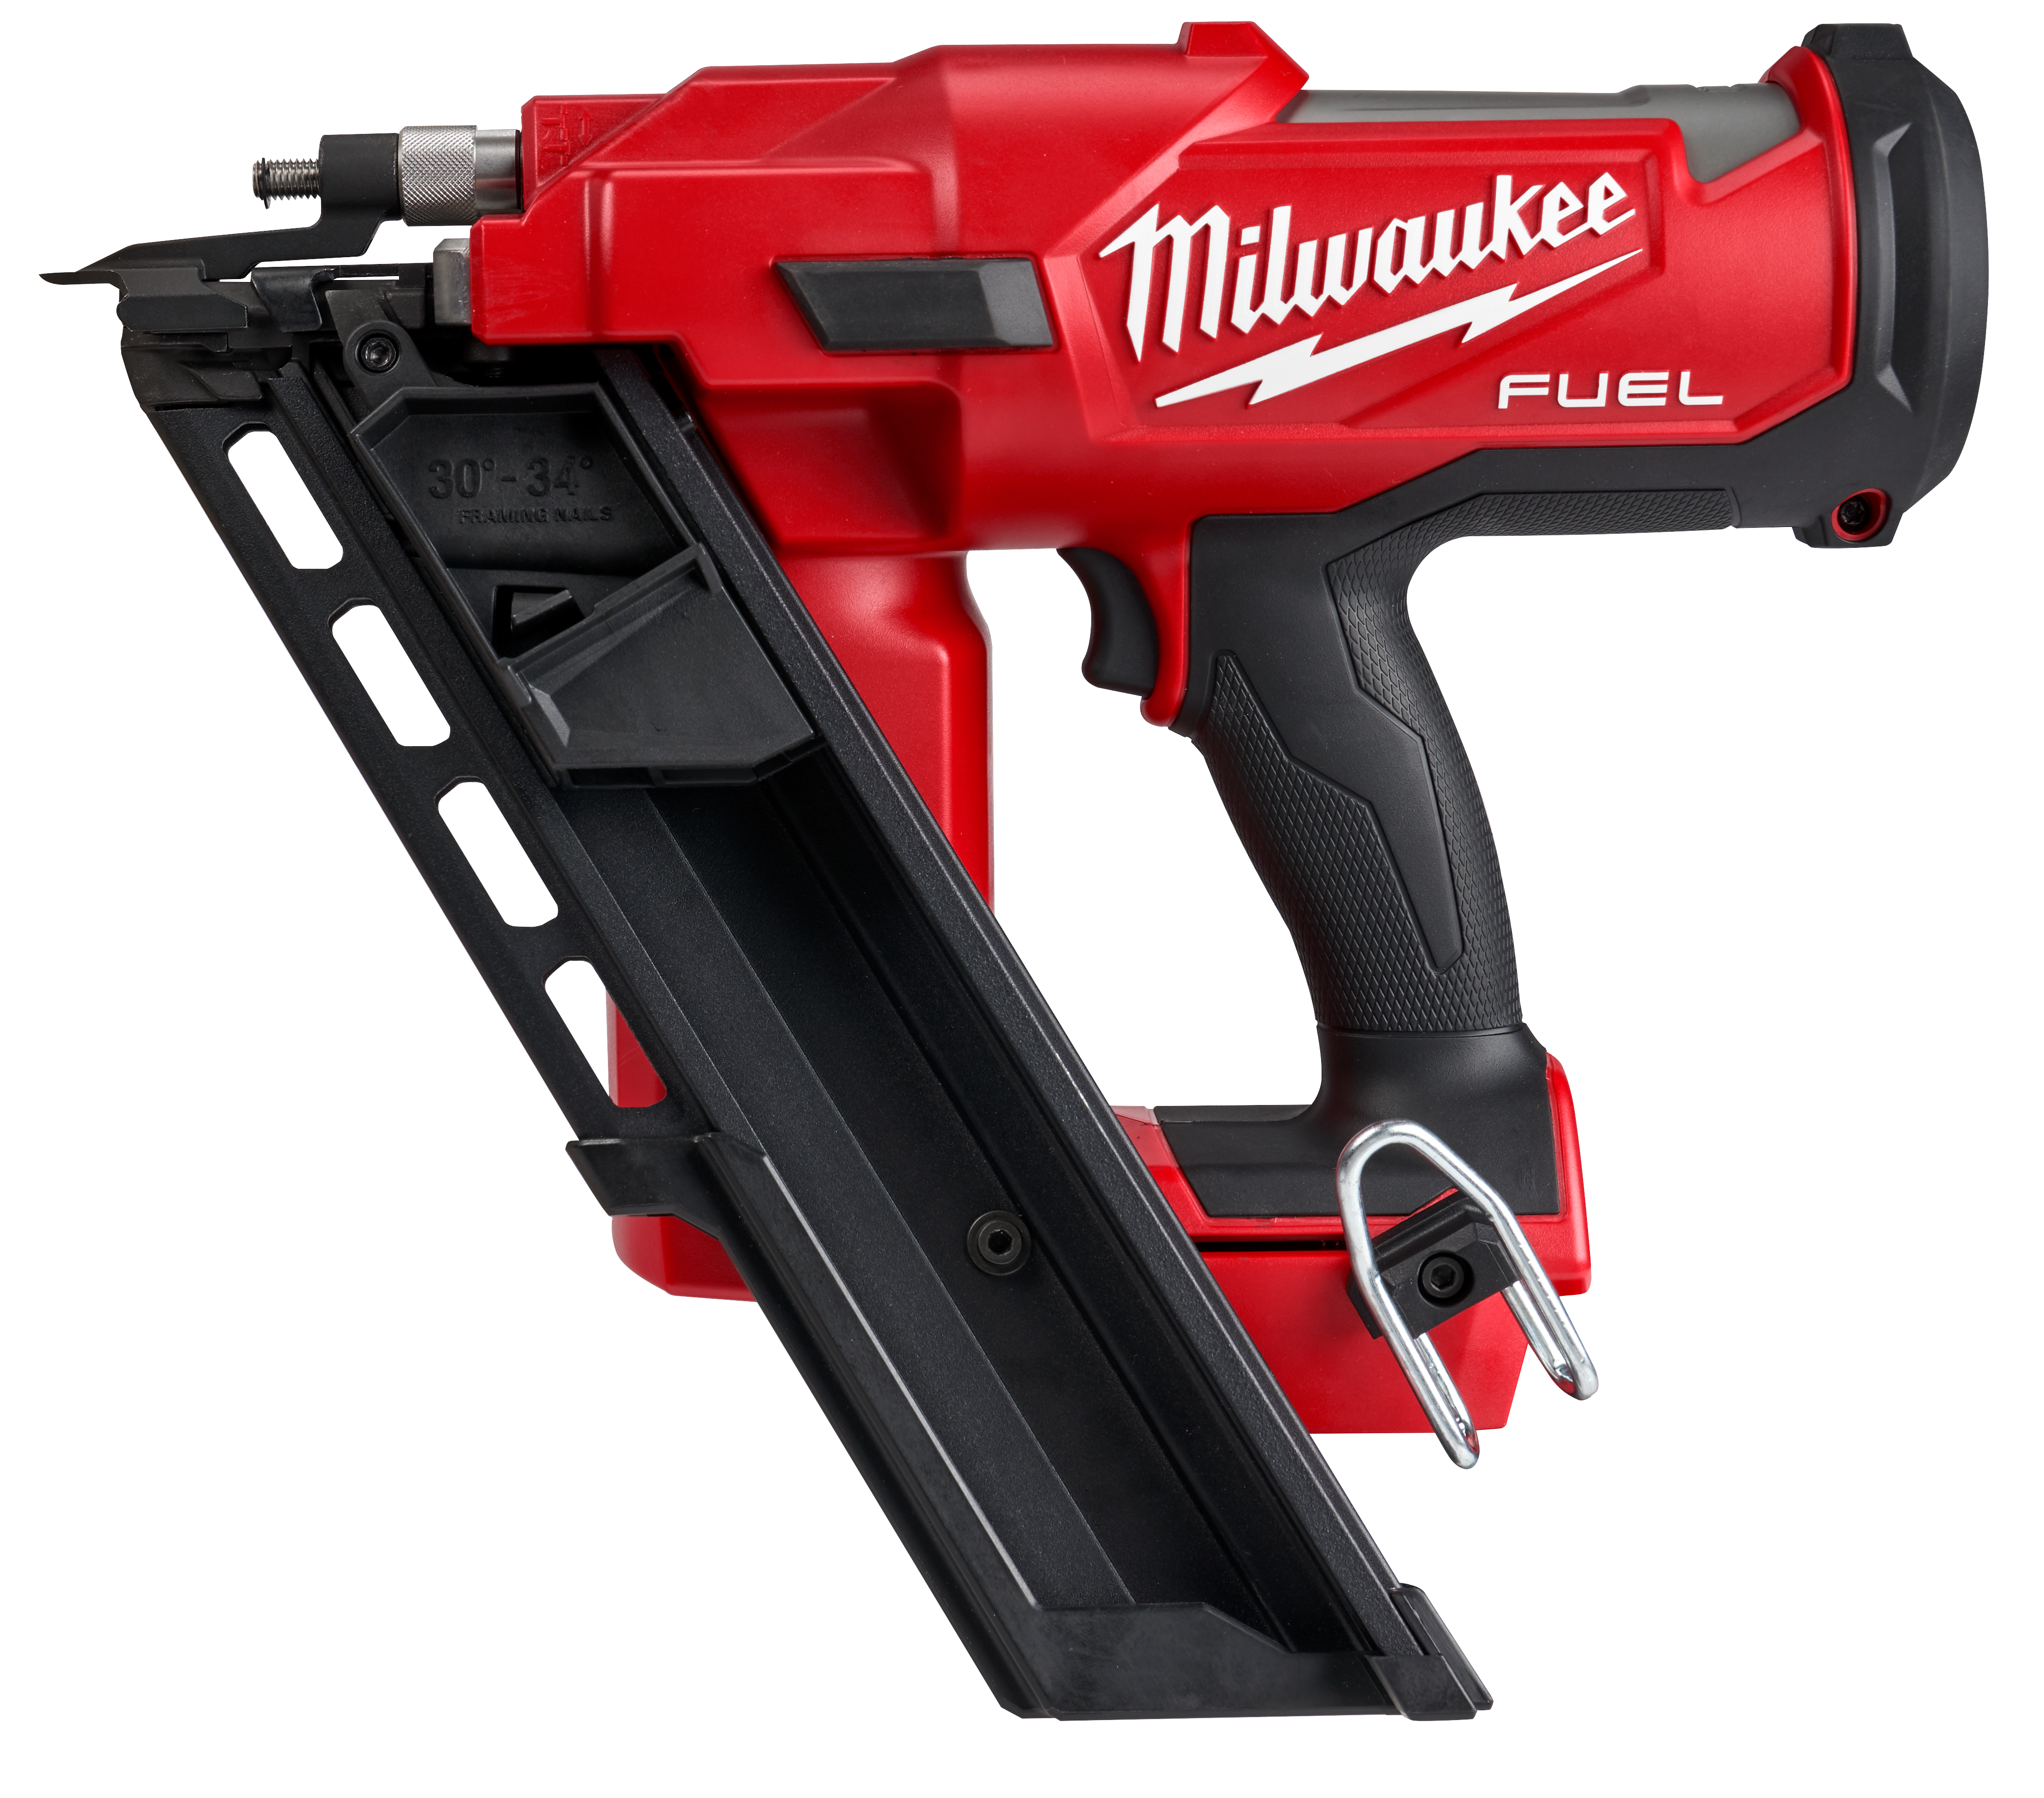 M18 Fuel 90Mm Framing Nailer - 30-34° Paper Collated​ - Skin Only